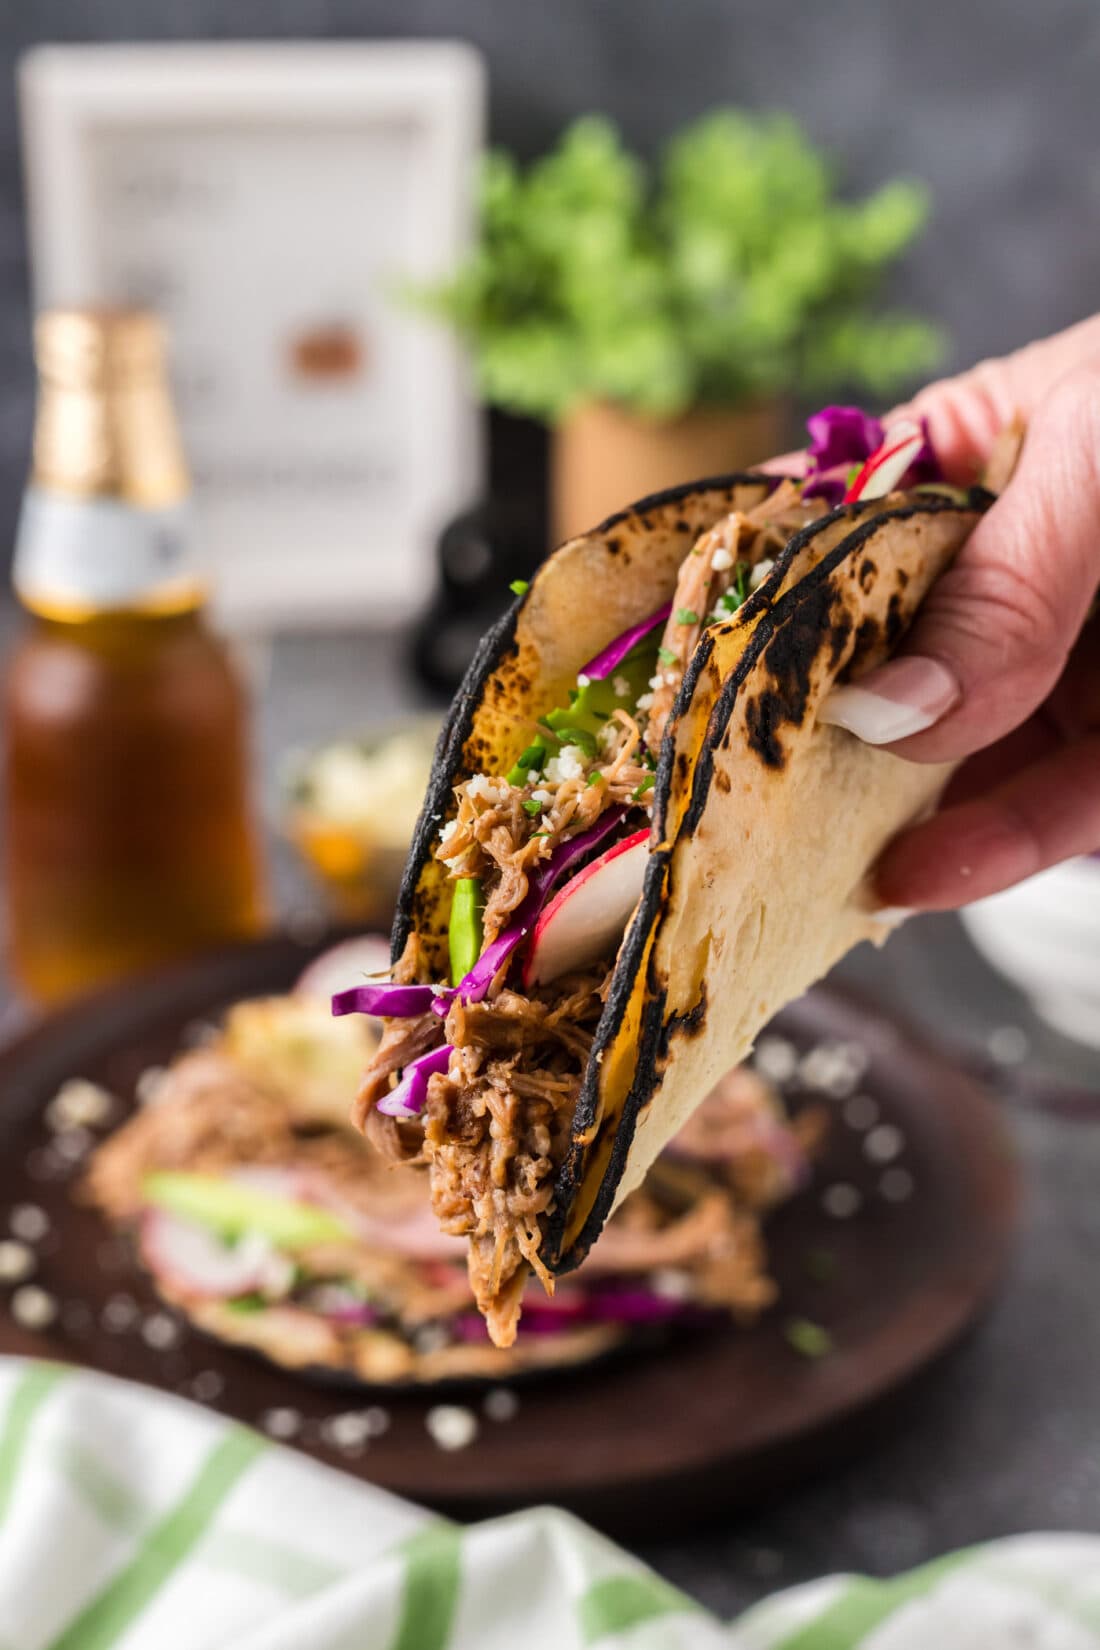 Hand holding up a Pulled Pork Taco